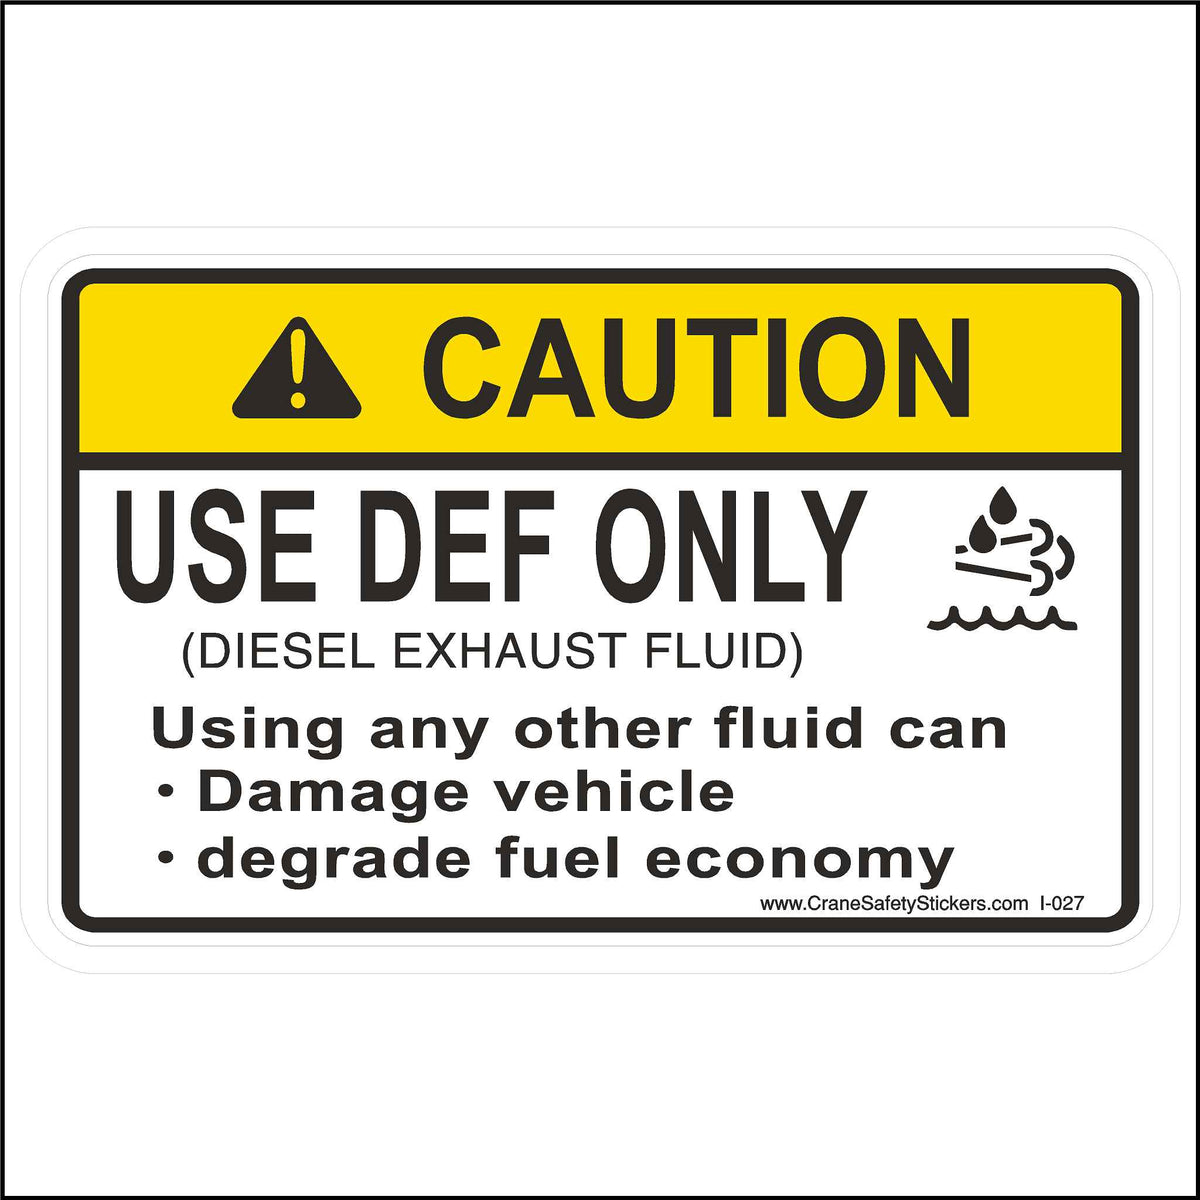 Diesel Exhaust Fluid Only Sticker Printed With. Caution Use DEF Only Diesel Exhaust Fluid Using any other fluid can Damage Vehicle Degrade fuel economy.